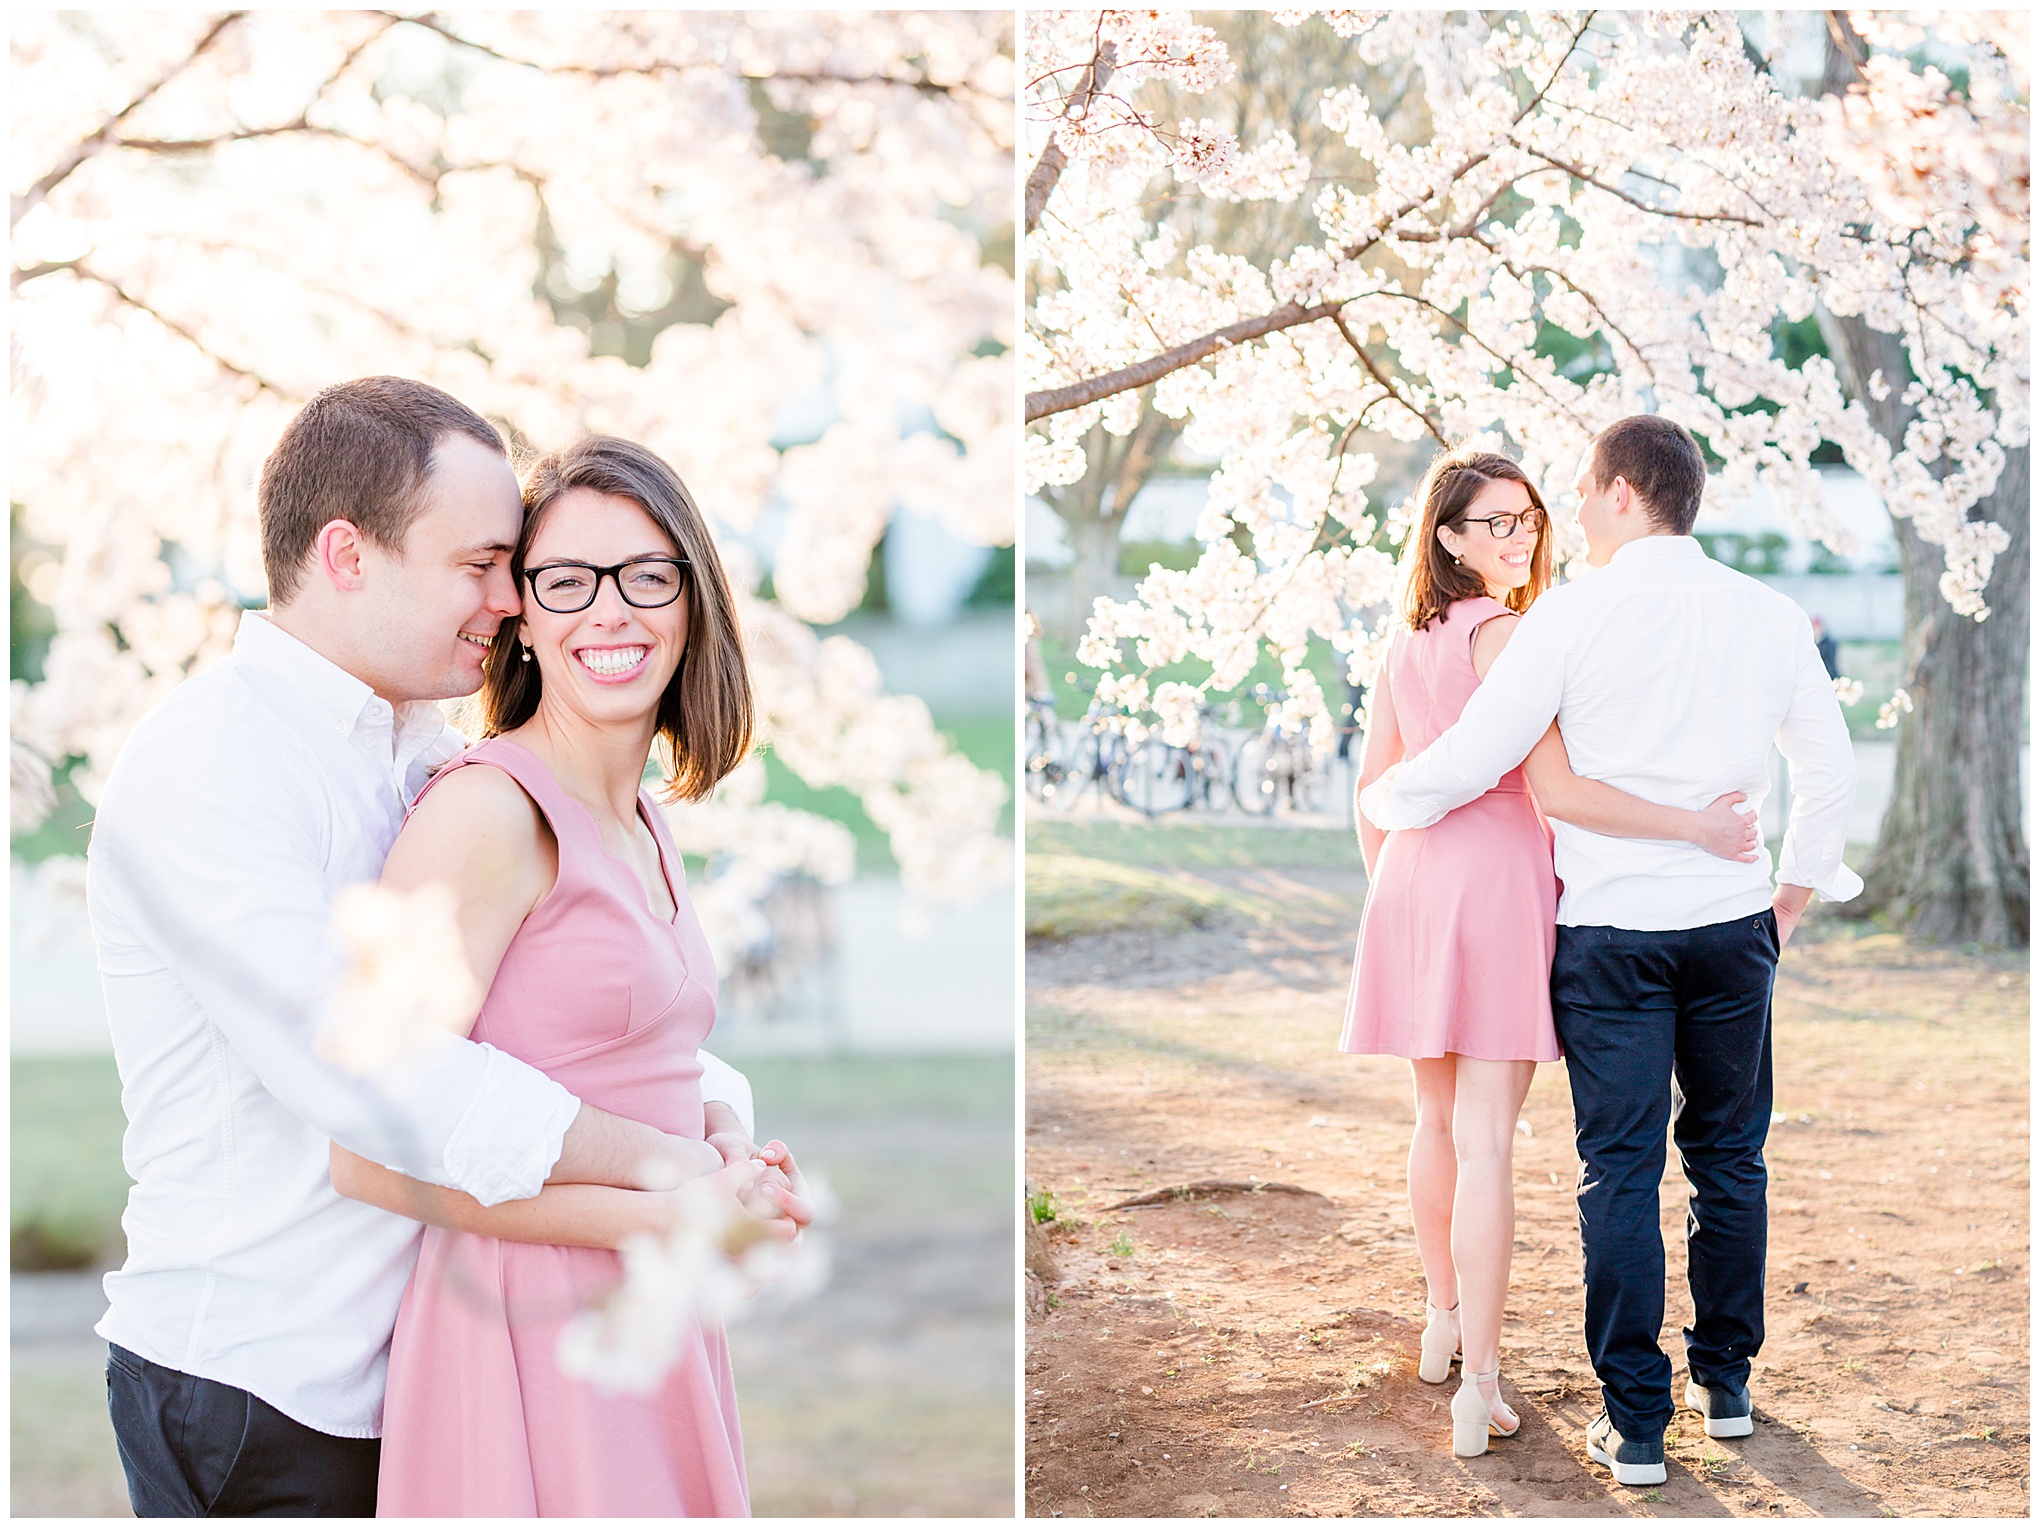 sunny cherry blossoms engagement session, Washington, D.C. engagement photos, Washington D.C. engagement photos, sunrrise engagement photos, cherry blossom engagement photos, D.C. cherry bloossoms, D.C. cherry blossoms photos, cherry blossom photos, cherry blossoms portrraits, sunny engagement photos, classic engagement photos, Rachel E.H. Photography, engagement session style, couple walking